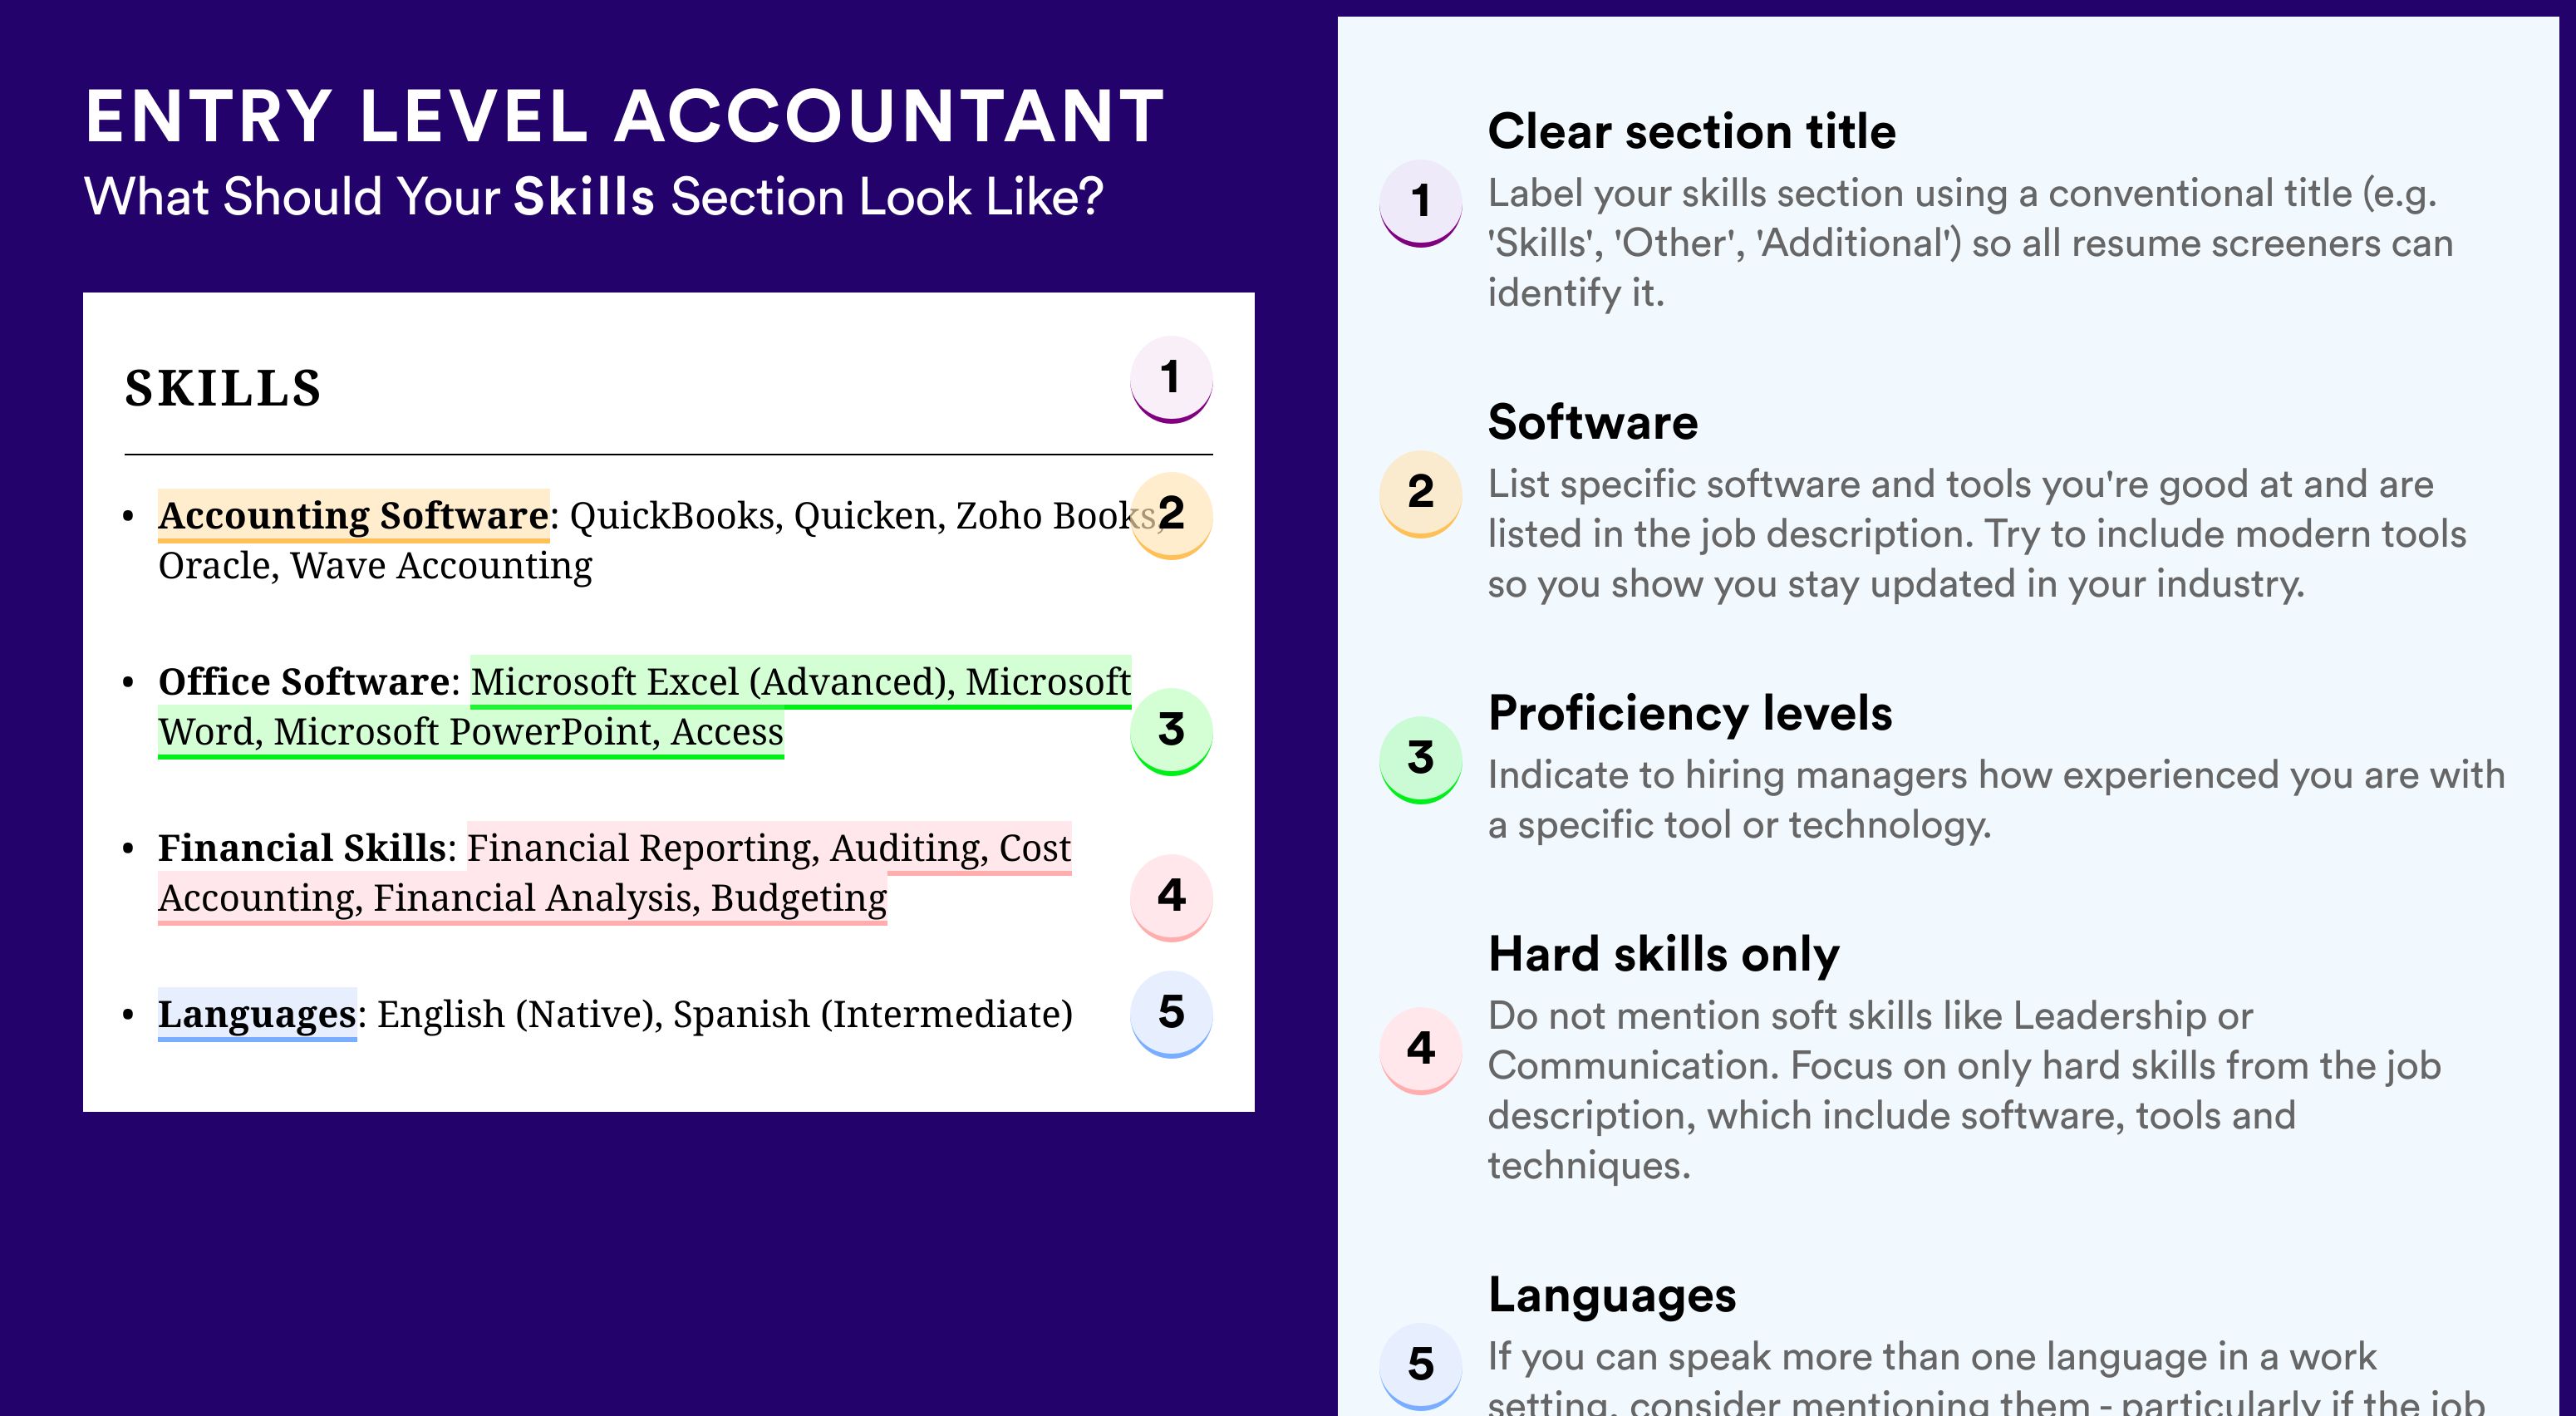 How To Write Your Skills Section - Entry Level Accountant Roles